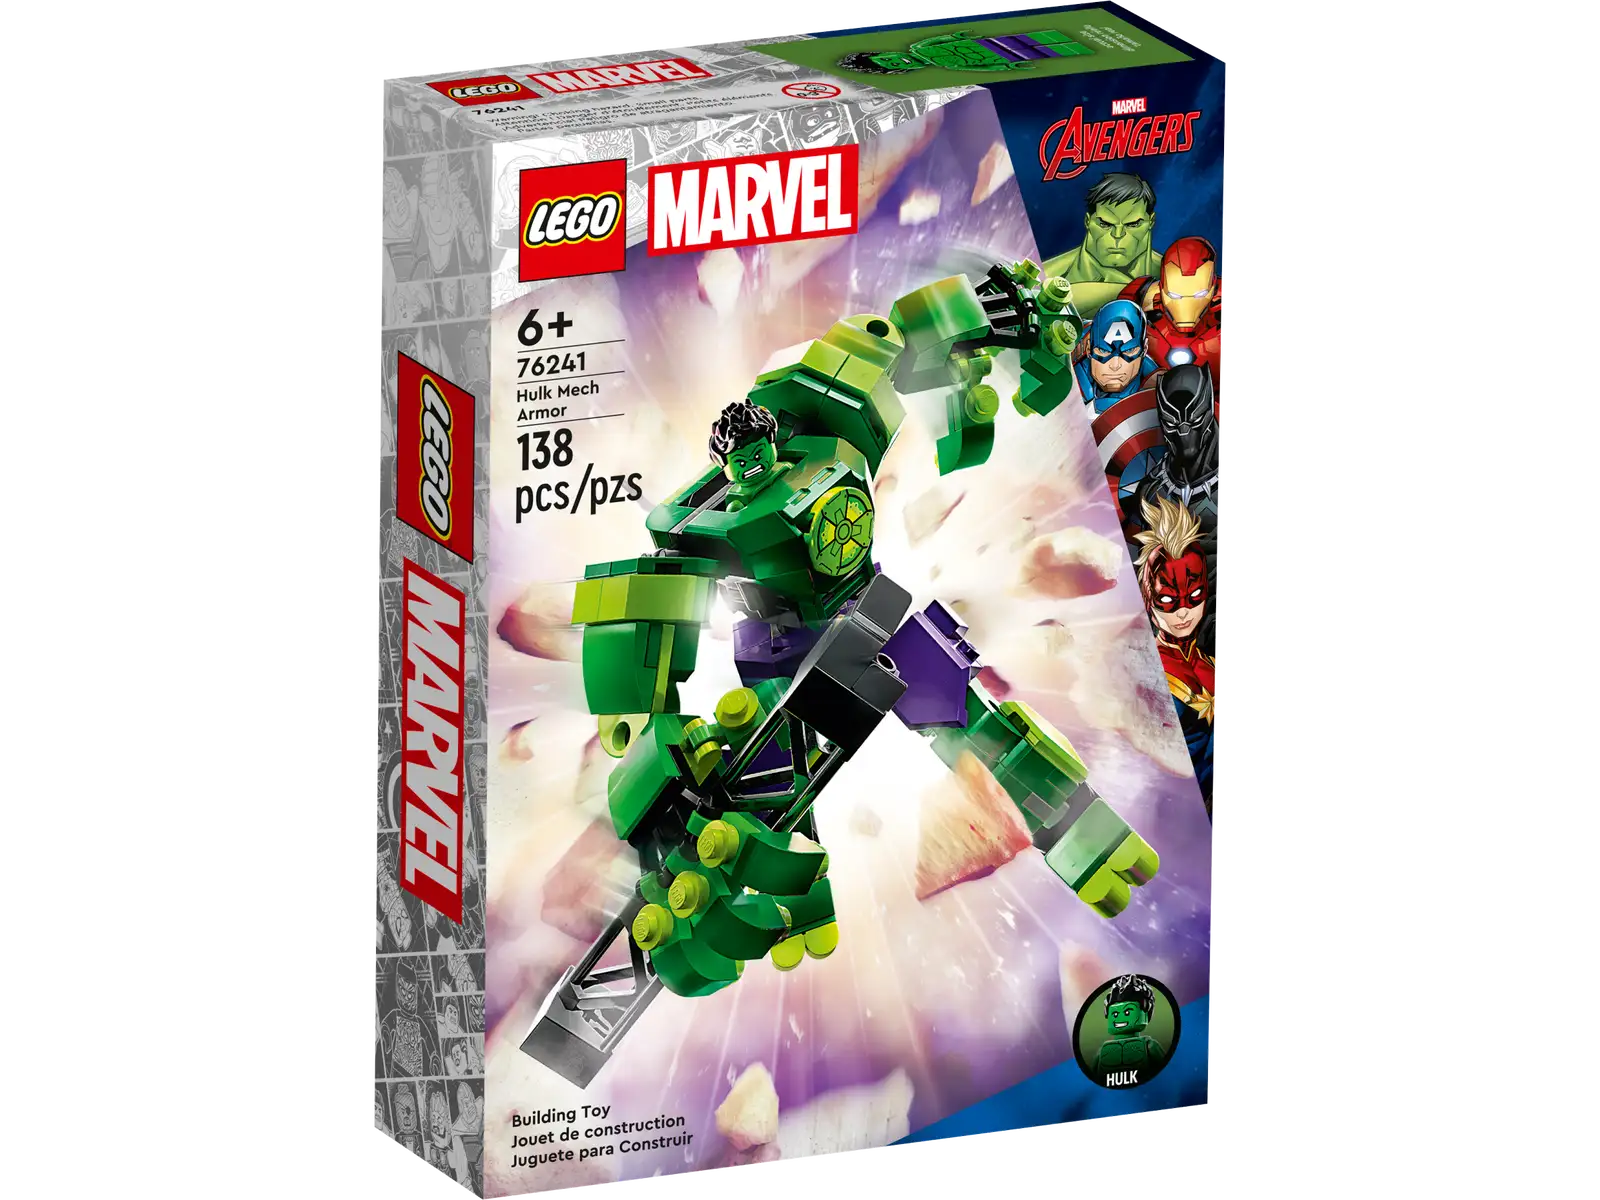 Treat a Marvel Avengers fan to supersized Super Hero action with LEGO® Marvel Hulk Mech Armor (76241). The mighty, movable mech puts mega Marvel adventures into the hands of kids aged 6 and up. Jointed Hulk mech figure Kids place the Hulk LEGO minifigure into the opening cockpit of the mech, ready to take the giant fighting machine into its next mission. The jointed mech features movable arms, legs and fingers, allowing it to be positioned and posed for endless play-and-display possibilities. A ‘stone’ pillar helps inspire imaginative action. For added digital fun, the LEGO Builder app features intuitive zoom and rotate tools that let kids visualize their model as they build. Hands-on treat – Young Super Heroes will enjoy endless action and imaginative play with LEGO® Marvel Hulk Mech Armor (76241), the mega, movable battling machine Iconic Super Hero – Includes a Hulk minifigure and a buildable Hulk mech with fully jointed arms, legs and fingers Movable limbs for play and display – The Hulk minifigure fits into the opening cockpit of the fully jointed mech, which easily adjusts for endless play-and-display action Treat for Marvel fans – This hands-on build-and-play toy is a versatile birthday, holiday or any-day gift for kids aged 6 and up Pick-up-and-play – This portable play figure stands over 4 in. (12 cm) tall, so kids can take it wherever they go Interactive digital building – The LEGO® Builder app features intuitive zoom and rotate tools that let kids visualize their model as they build Unlimited Super Hero fun – The extensive range of LEGO® Marvel building toys is designed to deliver endless imaginative build-and-play possibilities Quality guaranteed – LEGO® components fulfill stringent industry quality standards to ensure they are consistent, compatible and connect smoothly every time Safety assured – LEGO® components are dropped, heated, crushed, twisted and analyzed to make sure they satisfy rigorous global safety standards